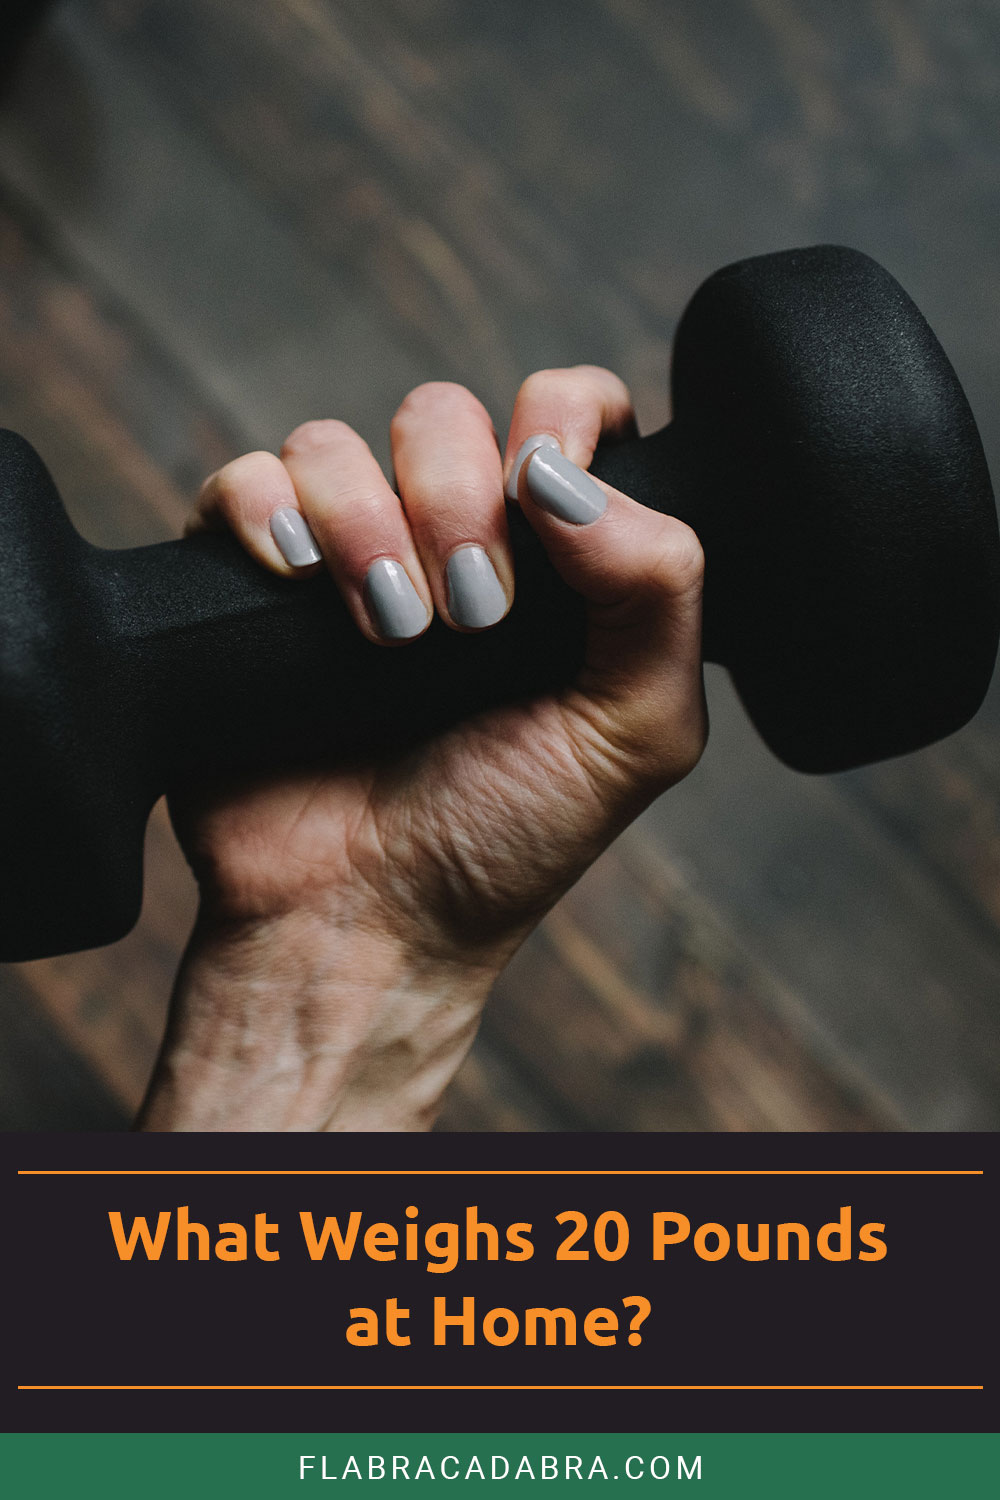 A black dumbbell in a hand with grey nail polish - What Weighs 20 Pounds at Home?